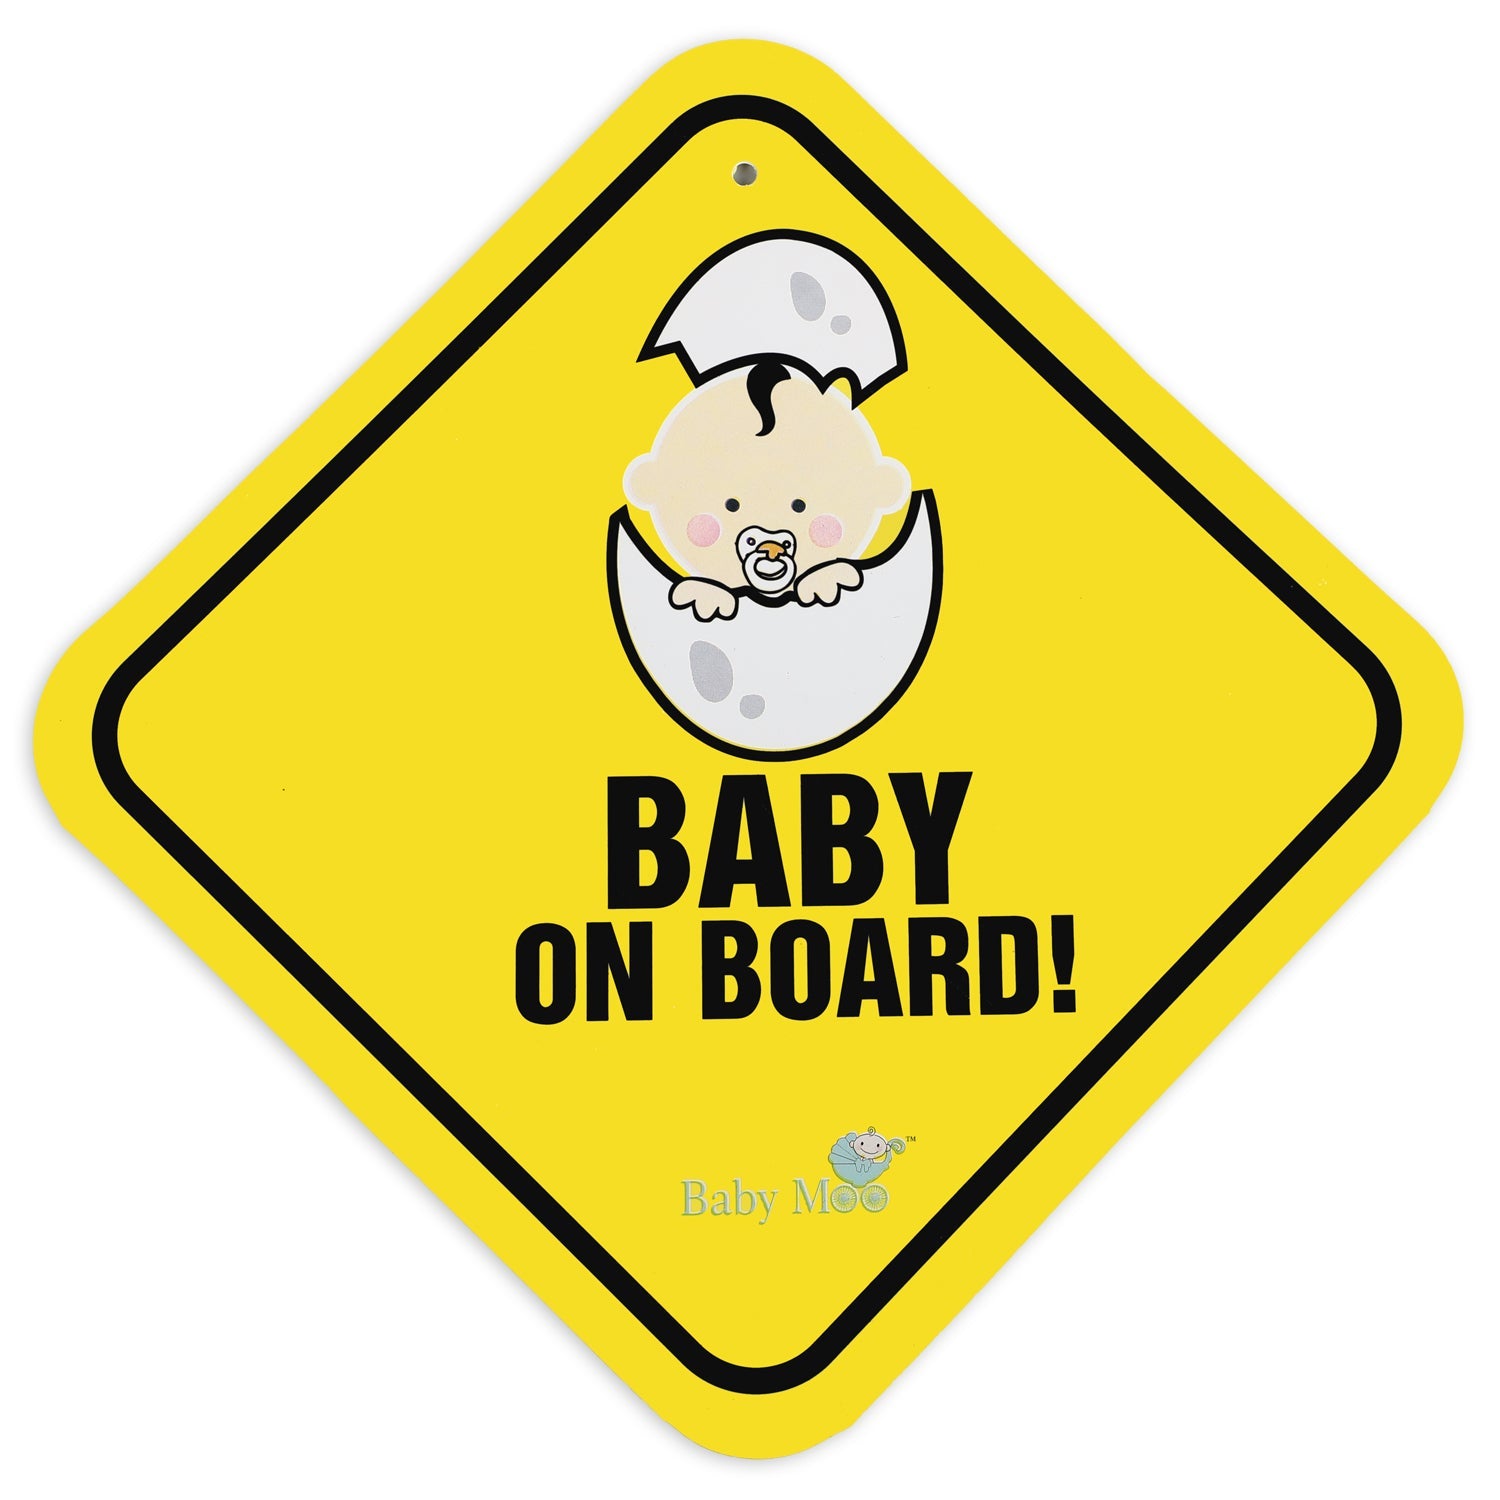 Baby Moo Newborn Car Safety Sign With Vacuum Suction Cup Clip - Yellow